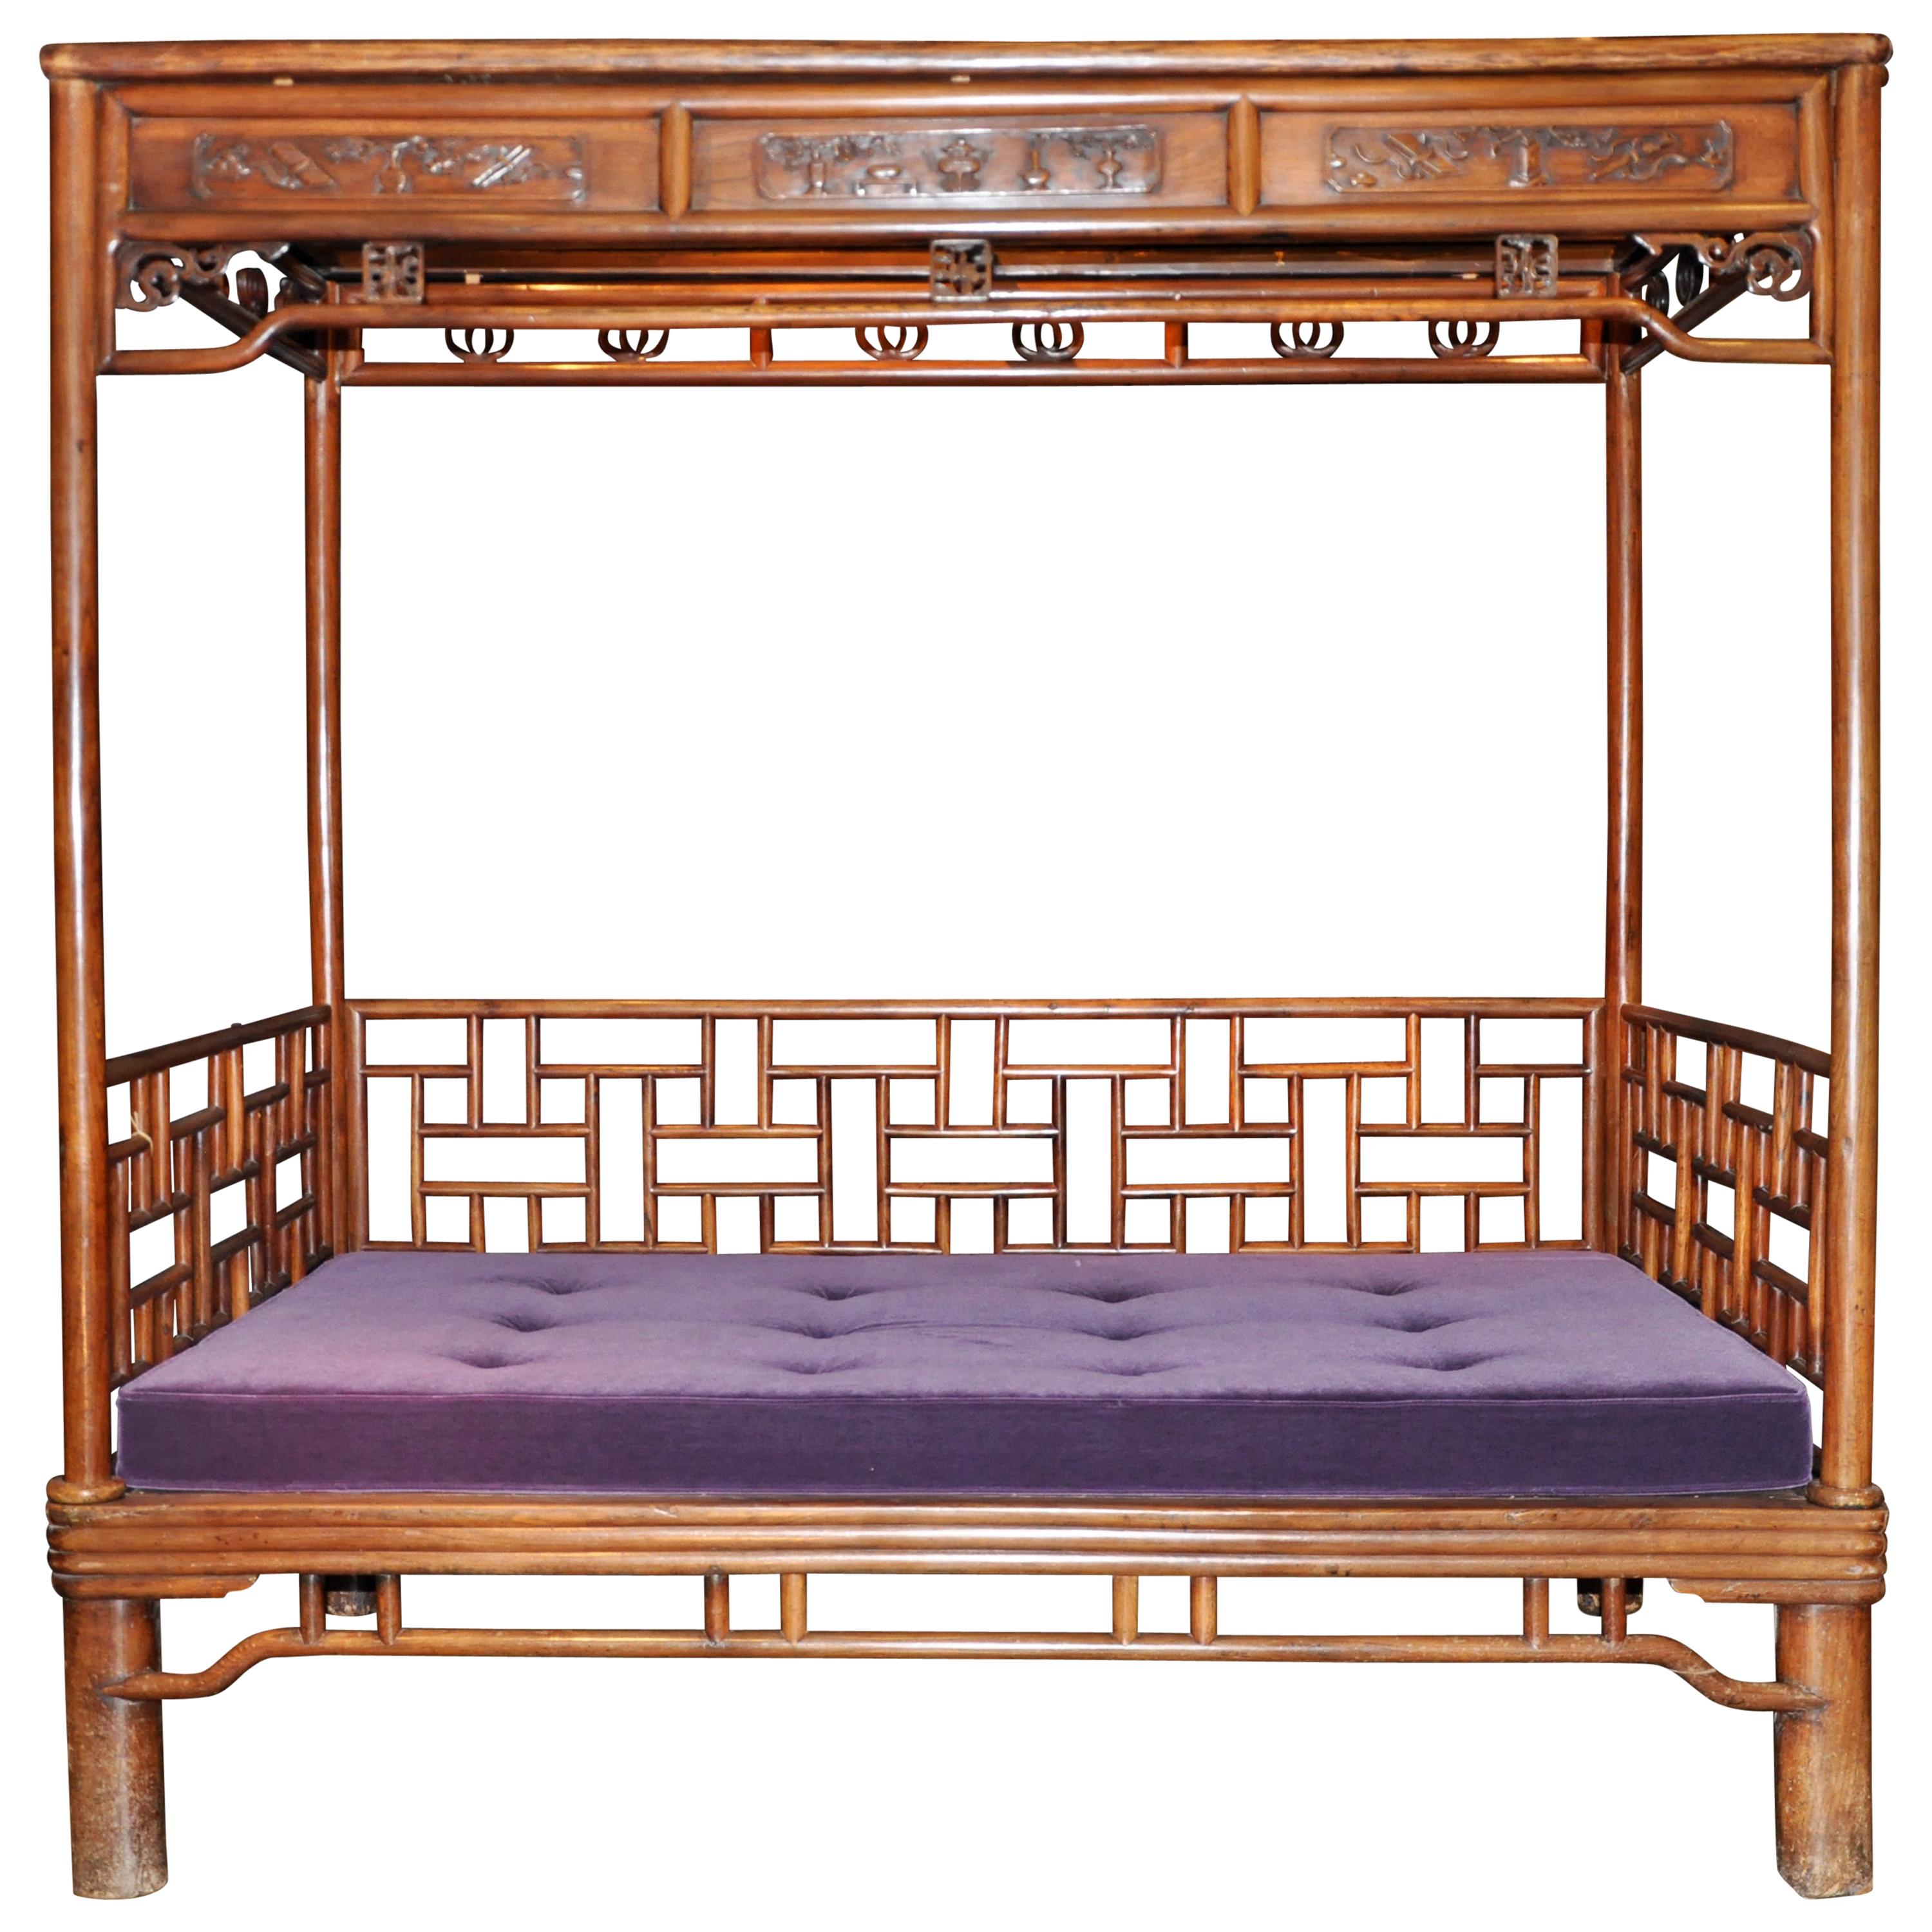 Impressive Chinese Day Bed